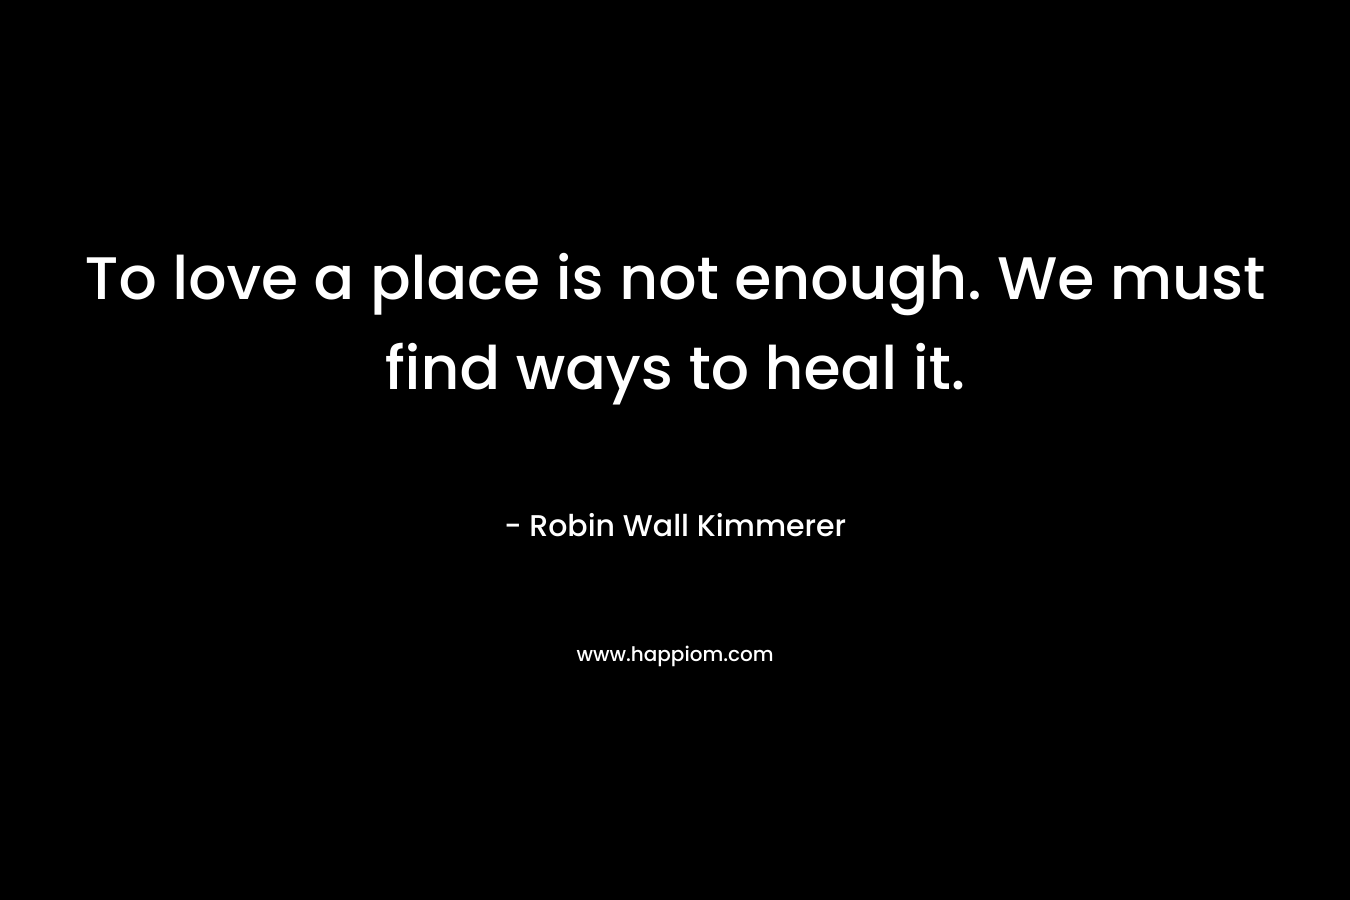 To love a place is not enough. We must find ways to heal it. – Robin Wall Kimmerer